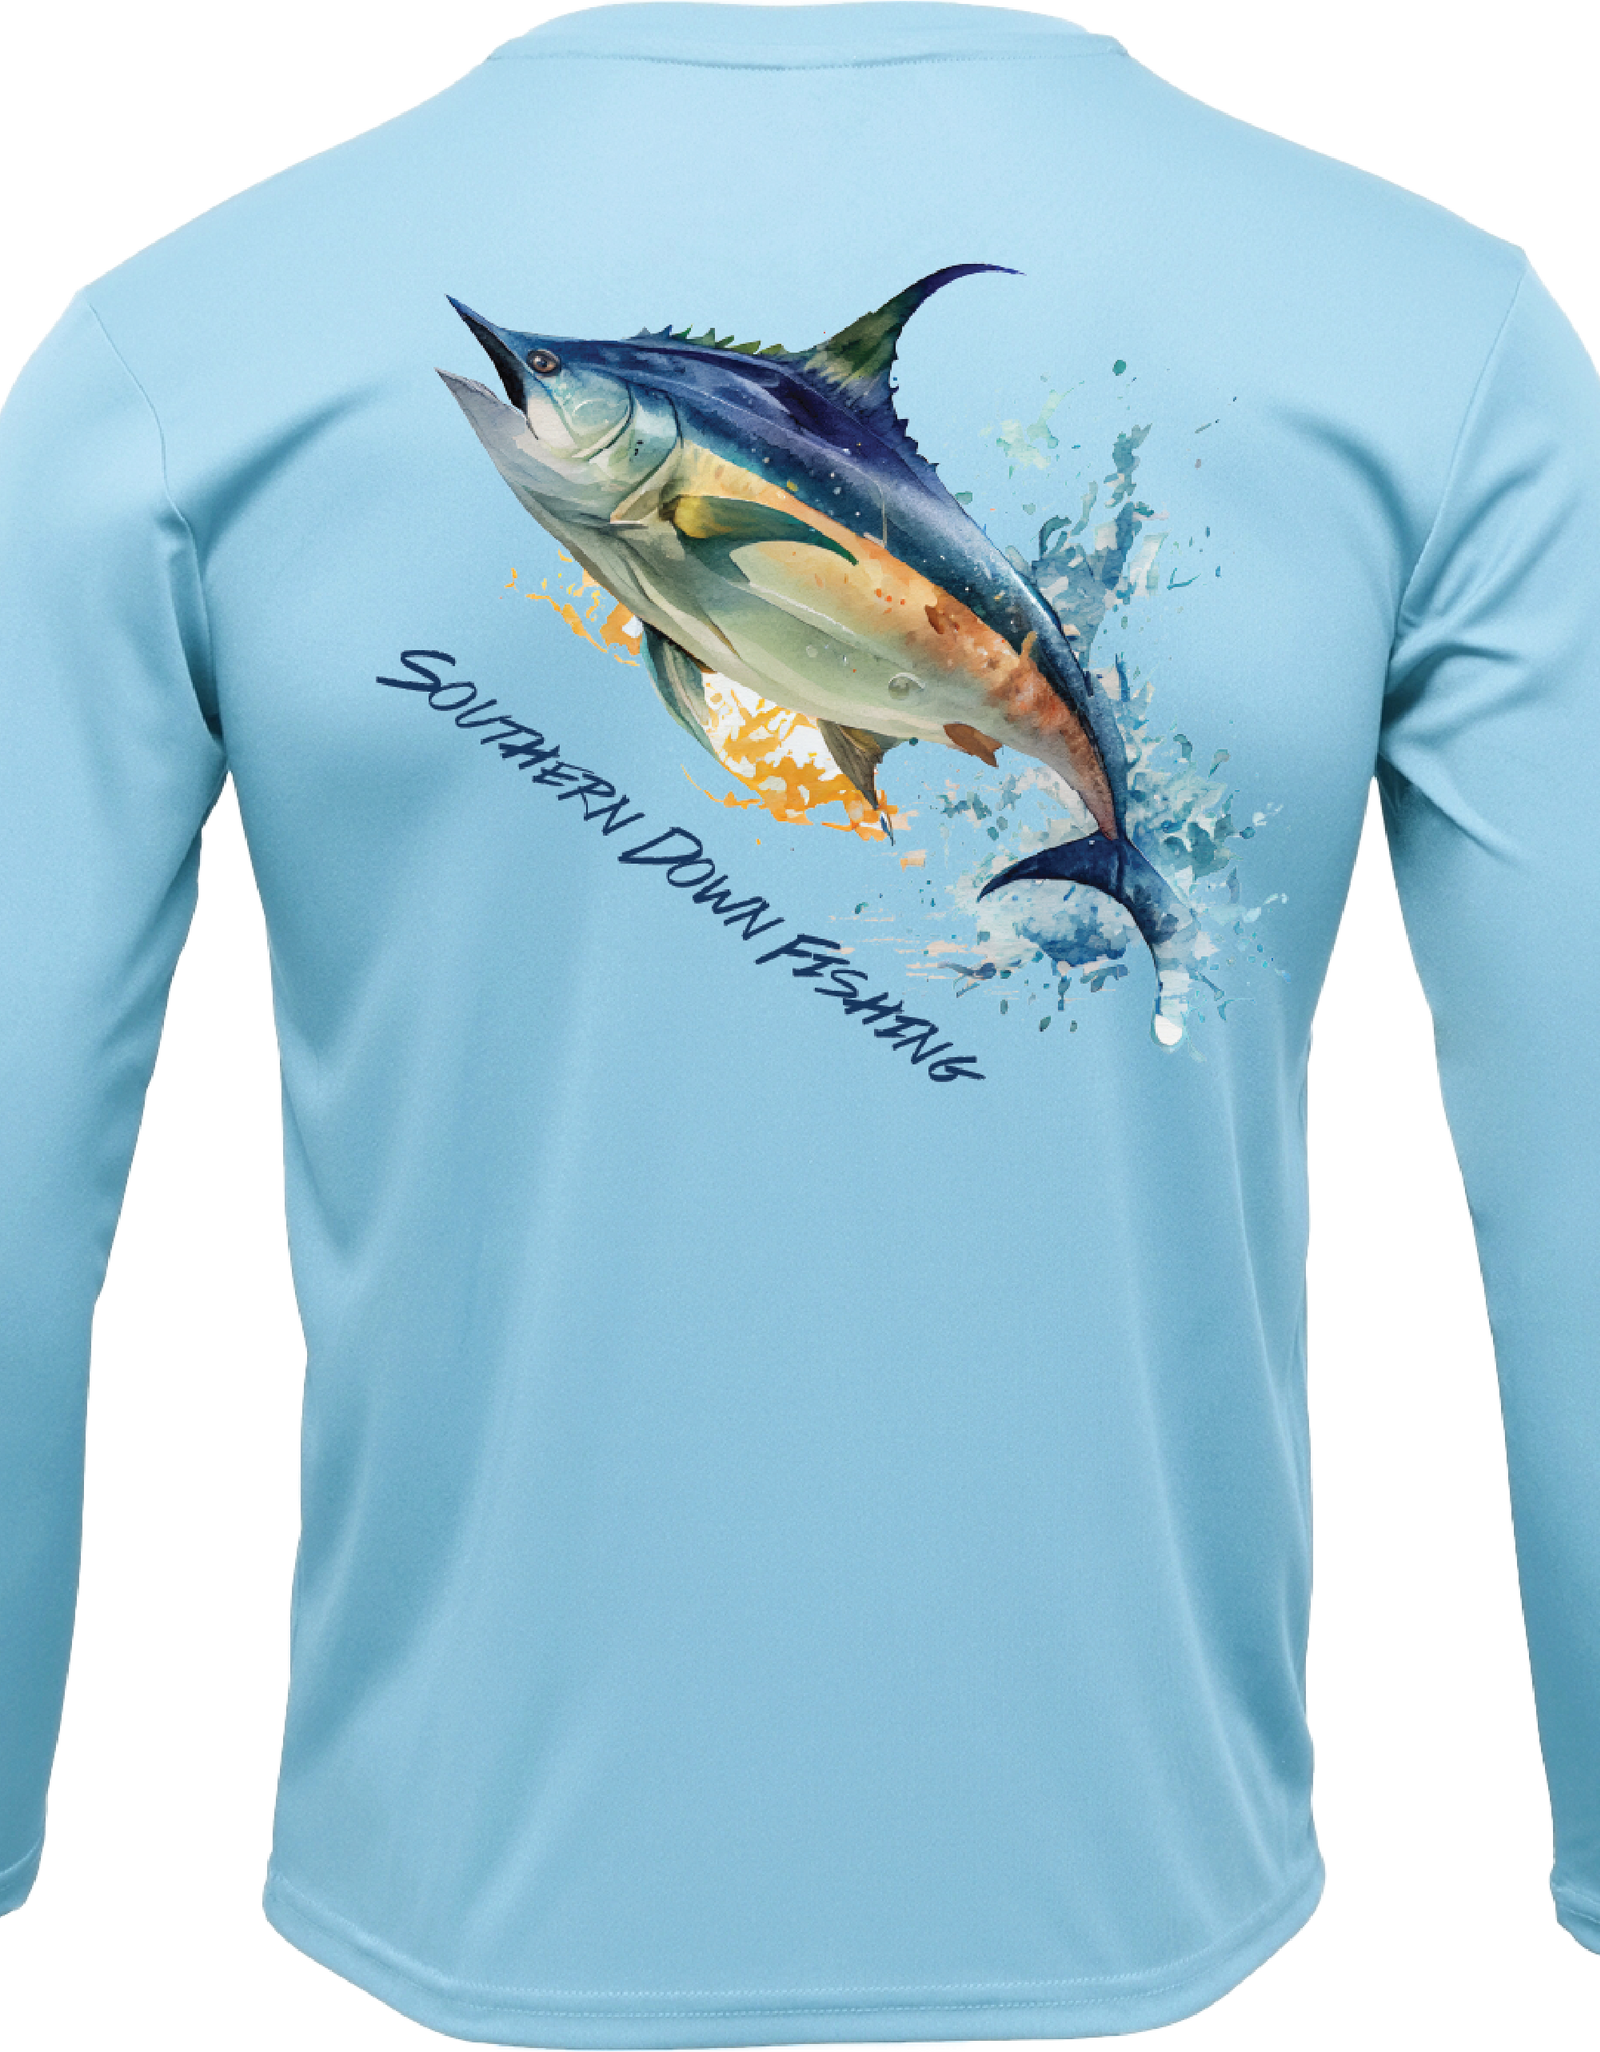 Blue Tuna Fishing Shirt – Southern Down Outfitters